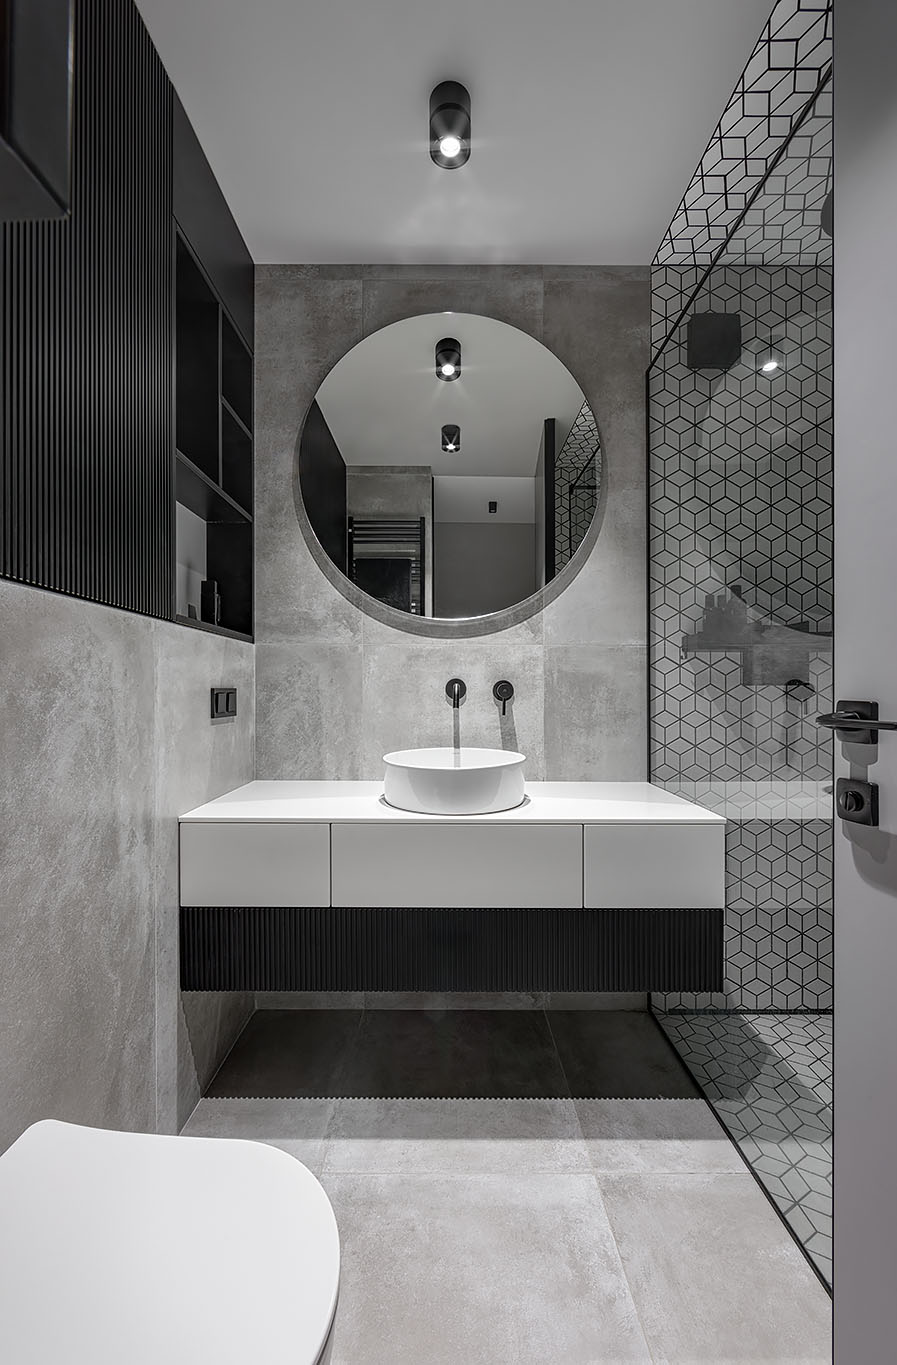 The bathroom includes a white, gray and black interior, with a bright white vanity, concrete wall and floor tiles, white geometric tiles with black grout, and a custom black shelving niche.